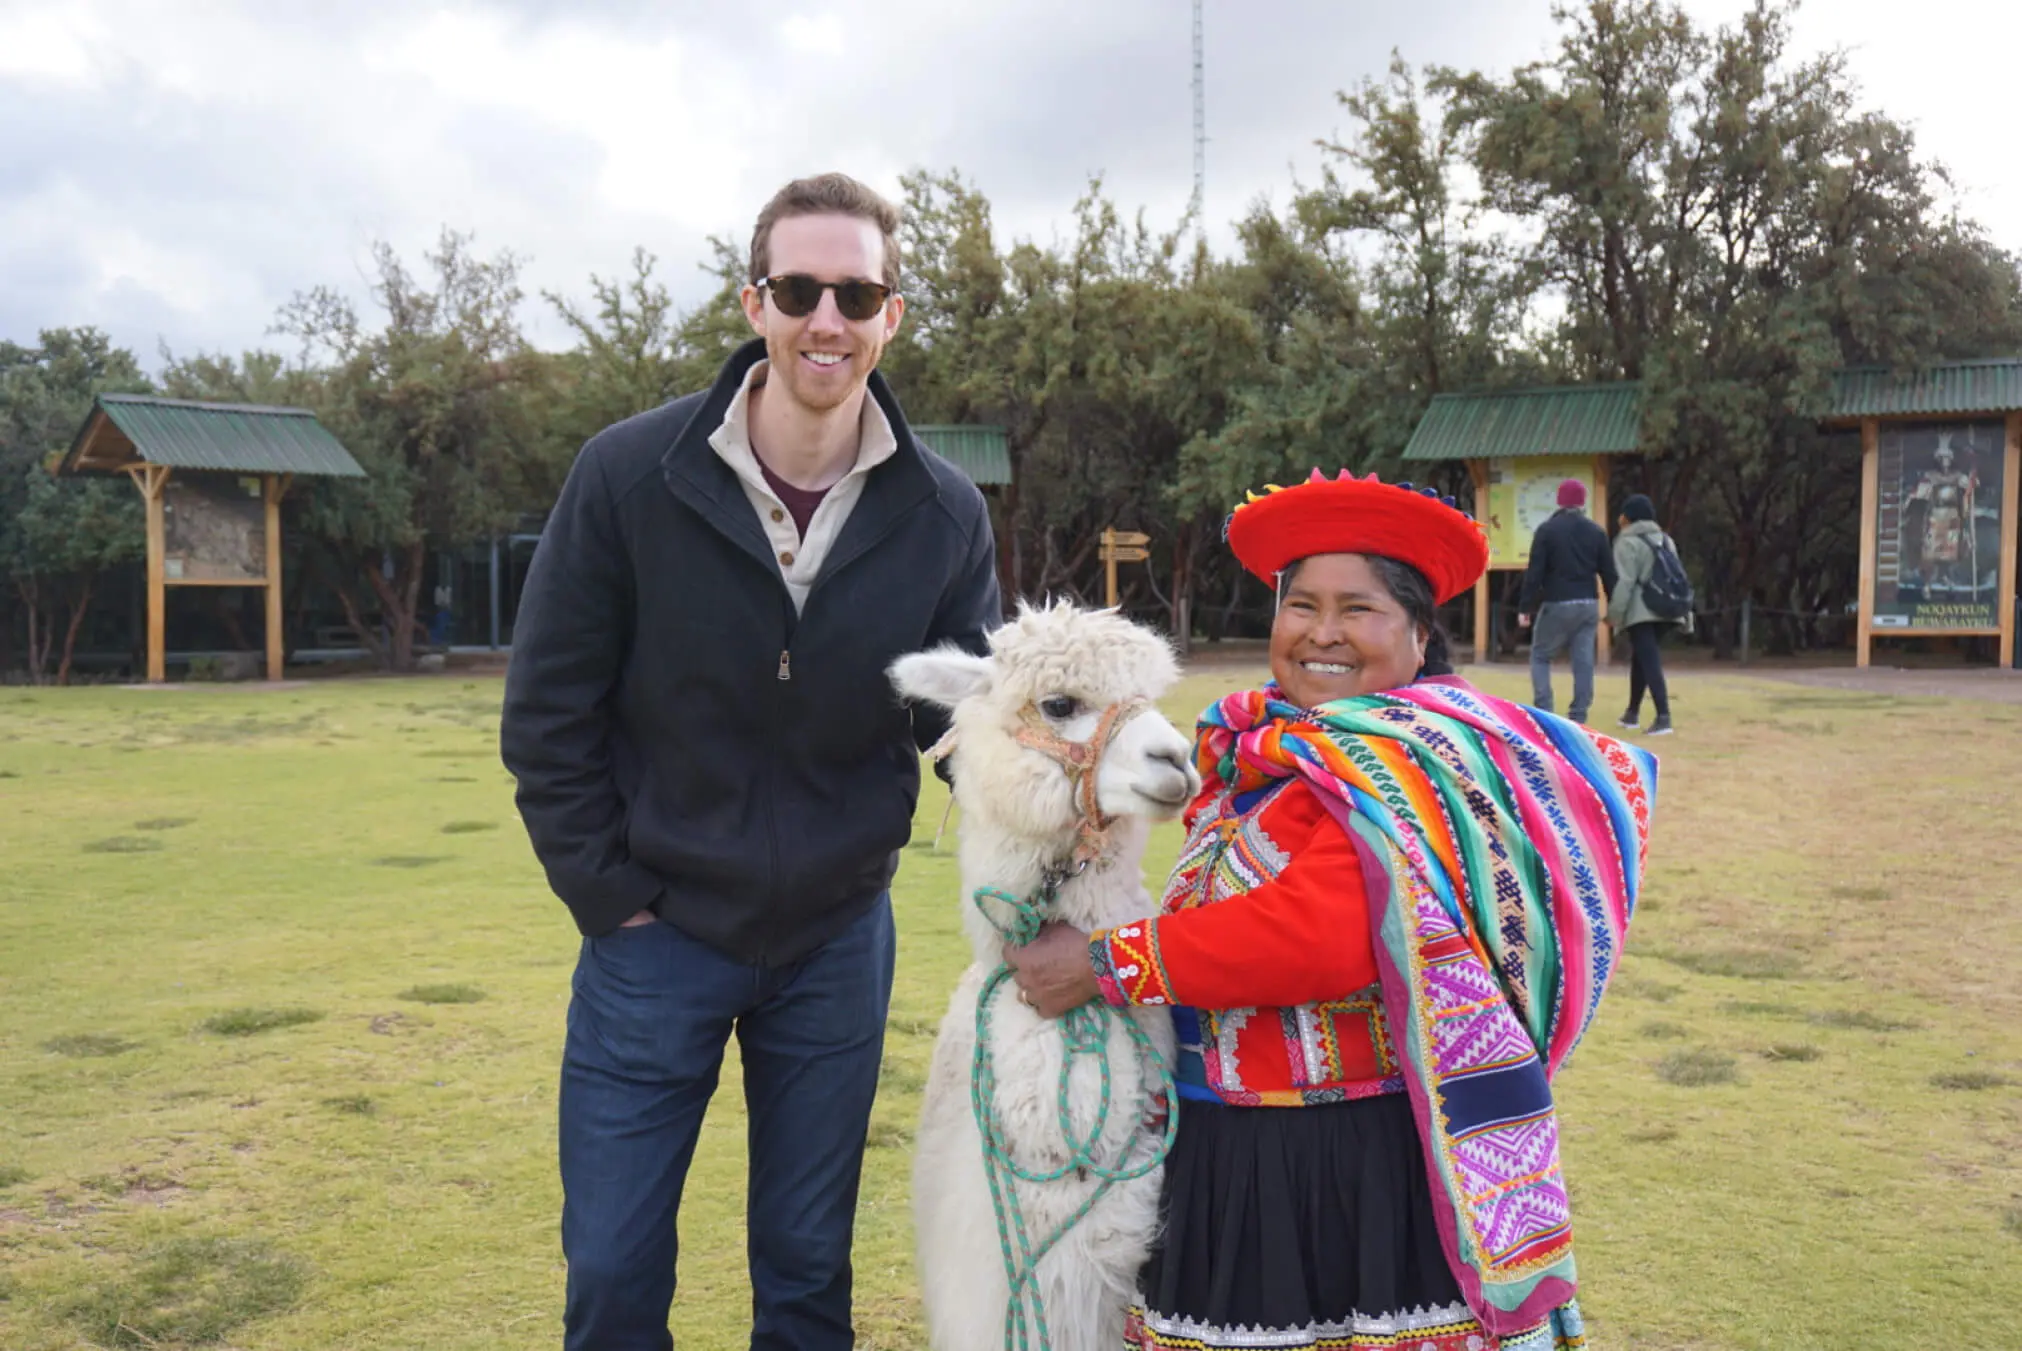 Fabric employee Spencer on a trip to Peru, smiling with a traditionally dressed woman and a llama.